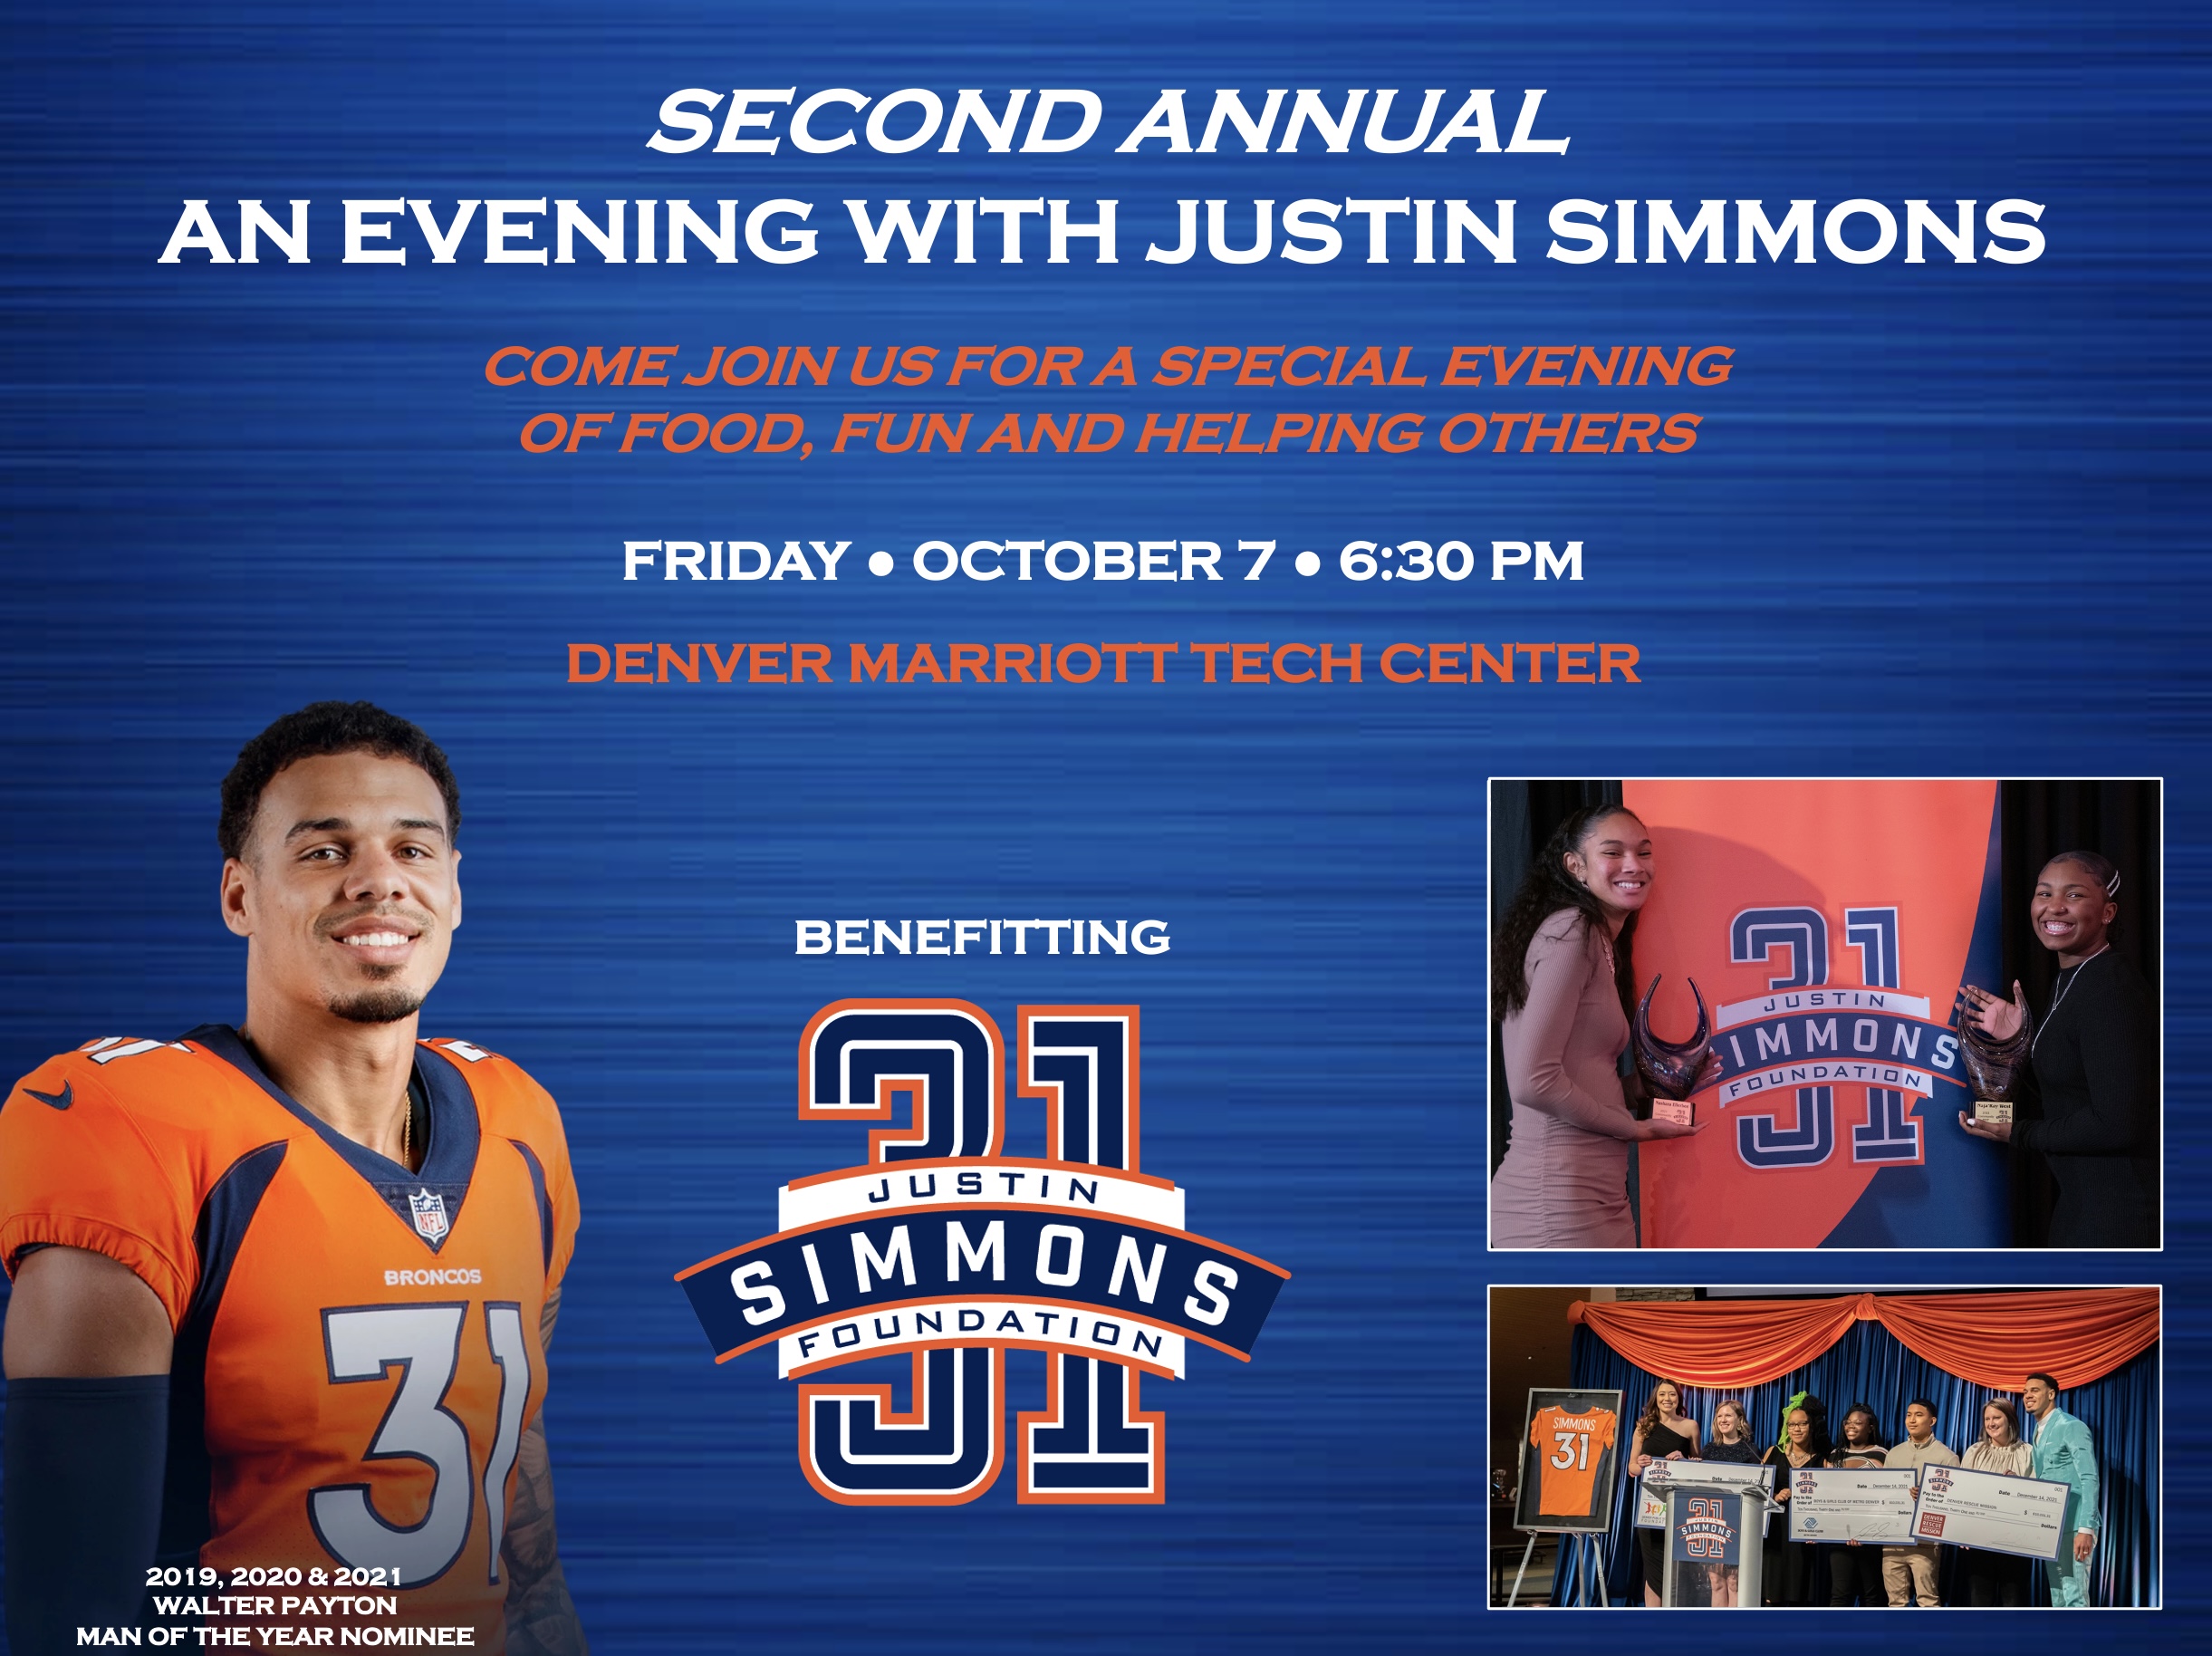 Justin Simmons To Hold Annual Foundation Event 'An Evening With Justin  Simmons'